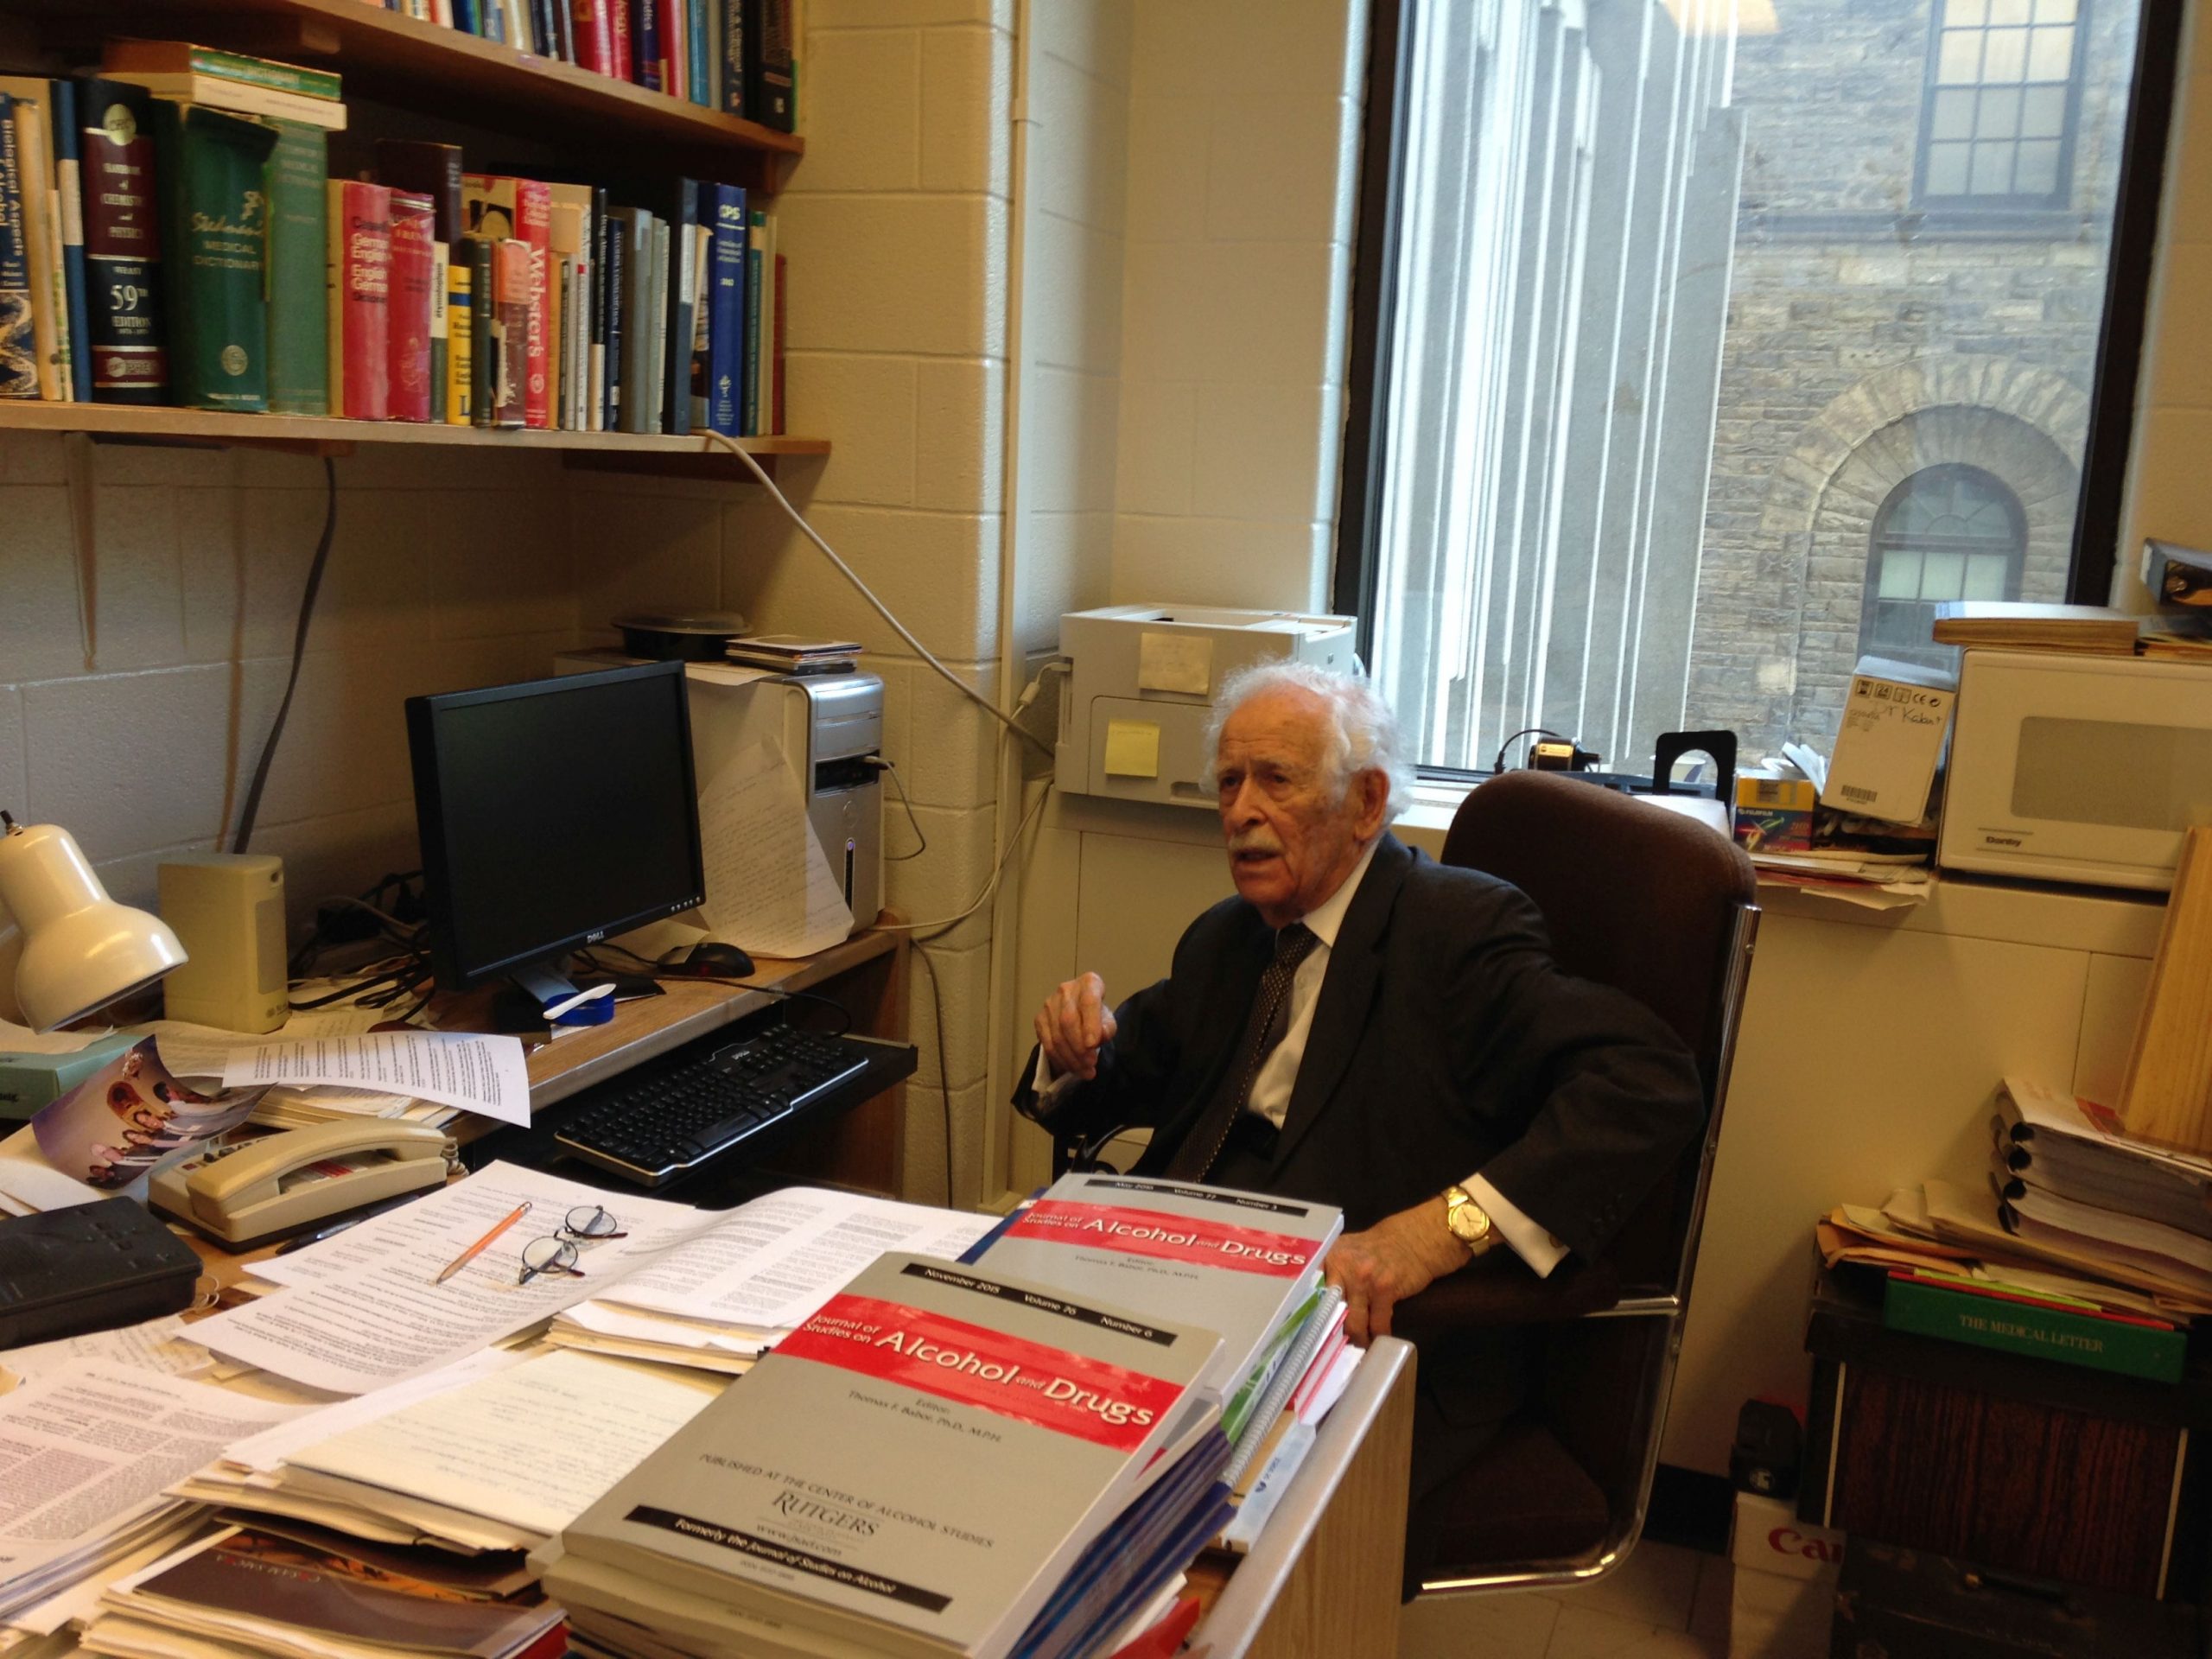 Researcher in his office